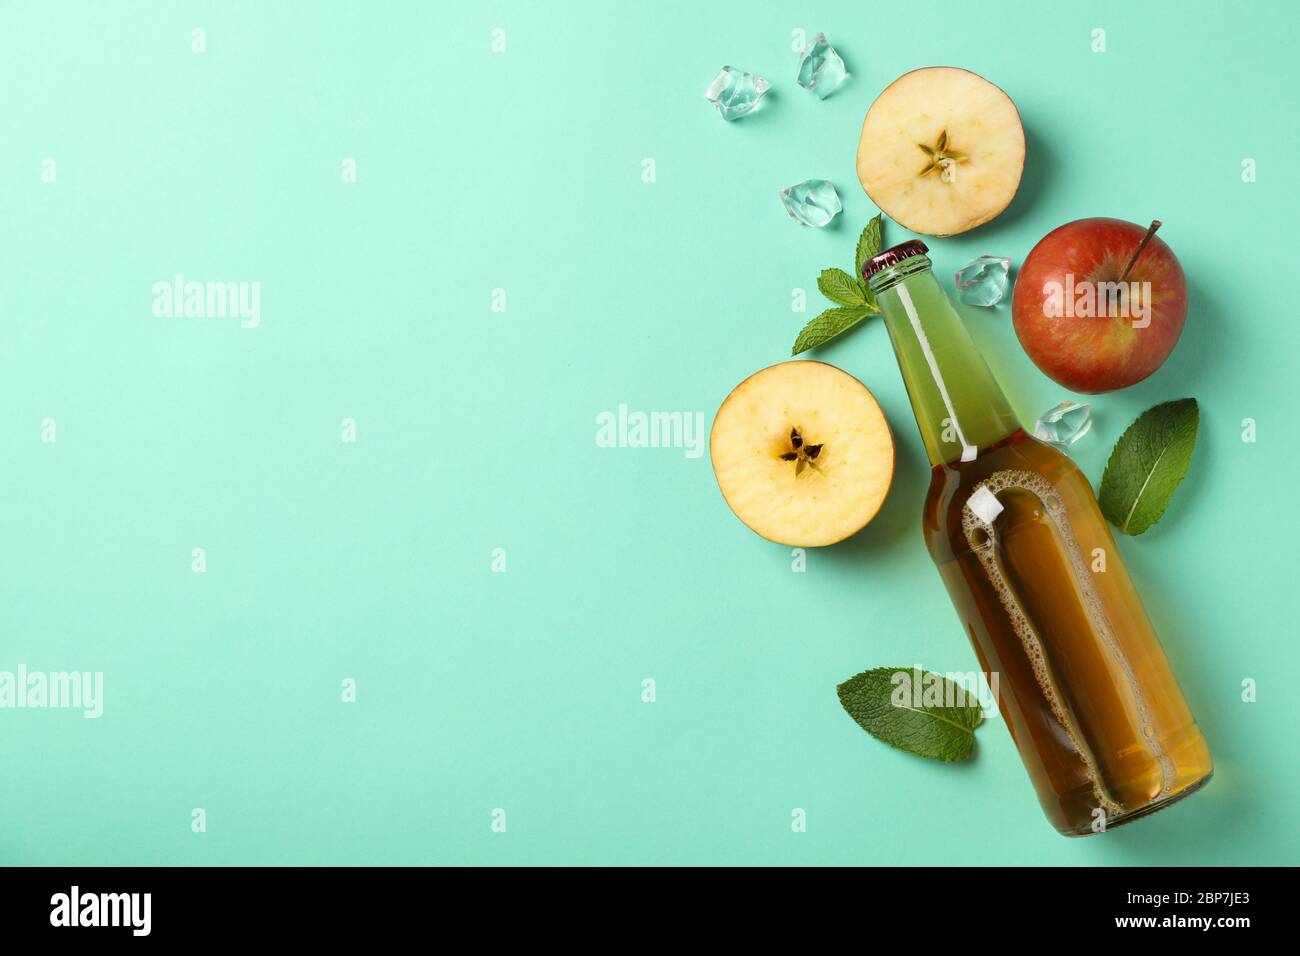 Composition with cider, apples and ice on mint background Stock Photo